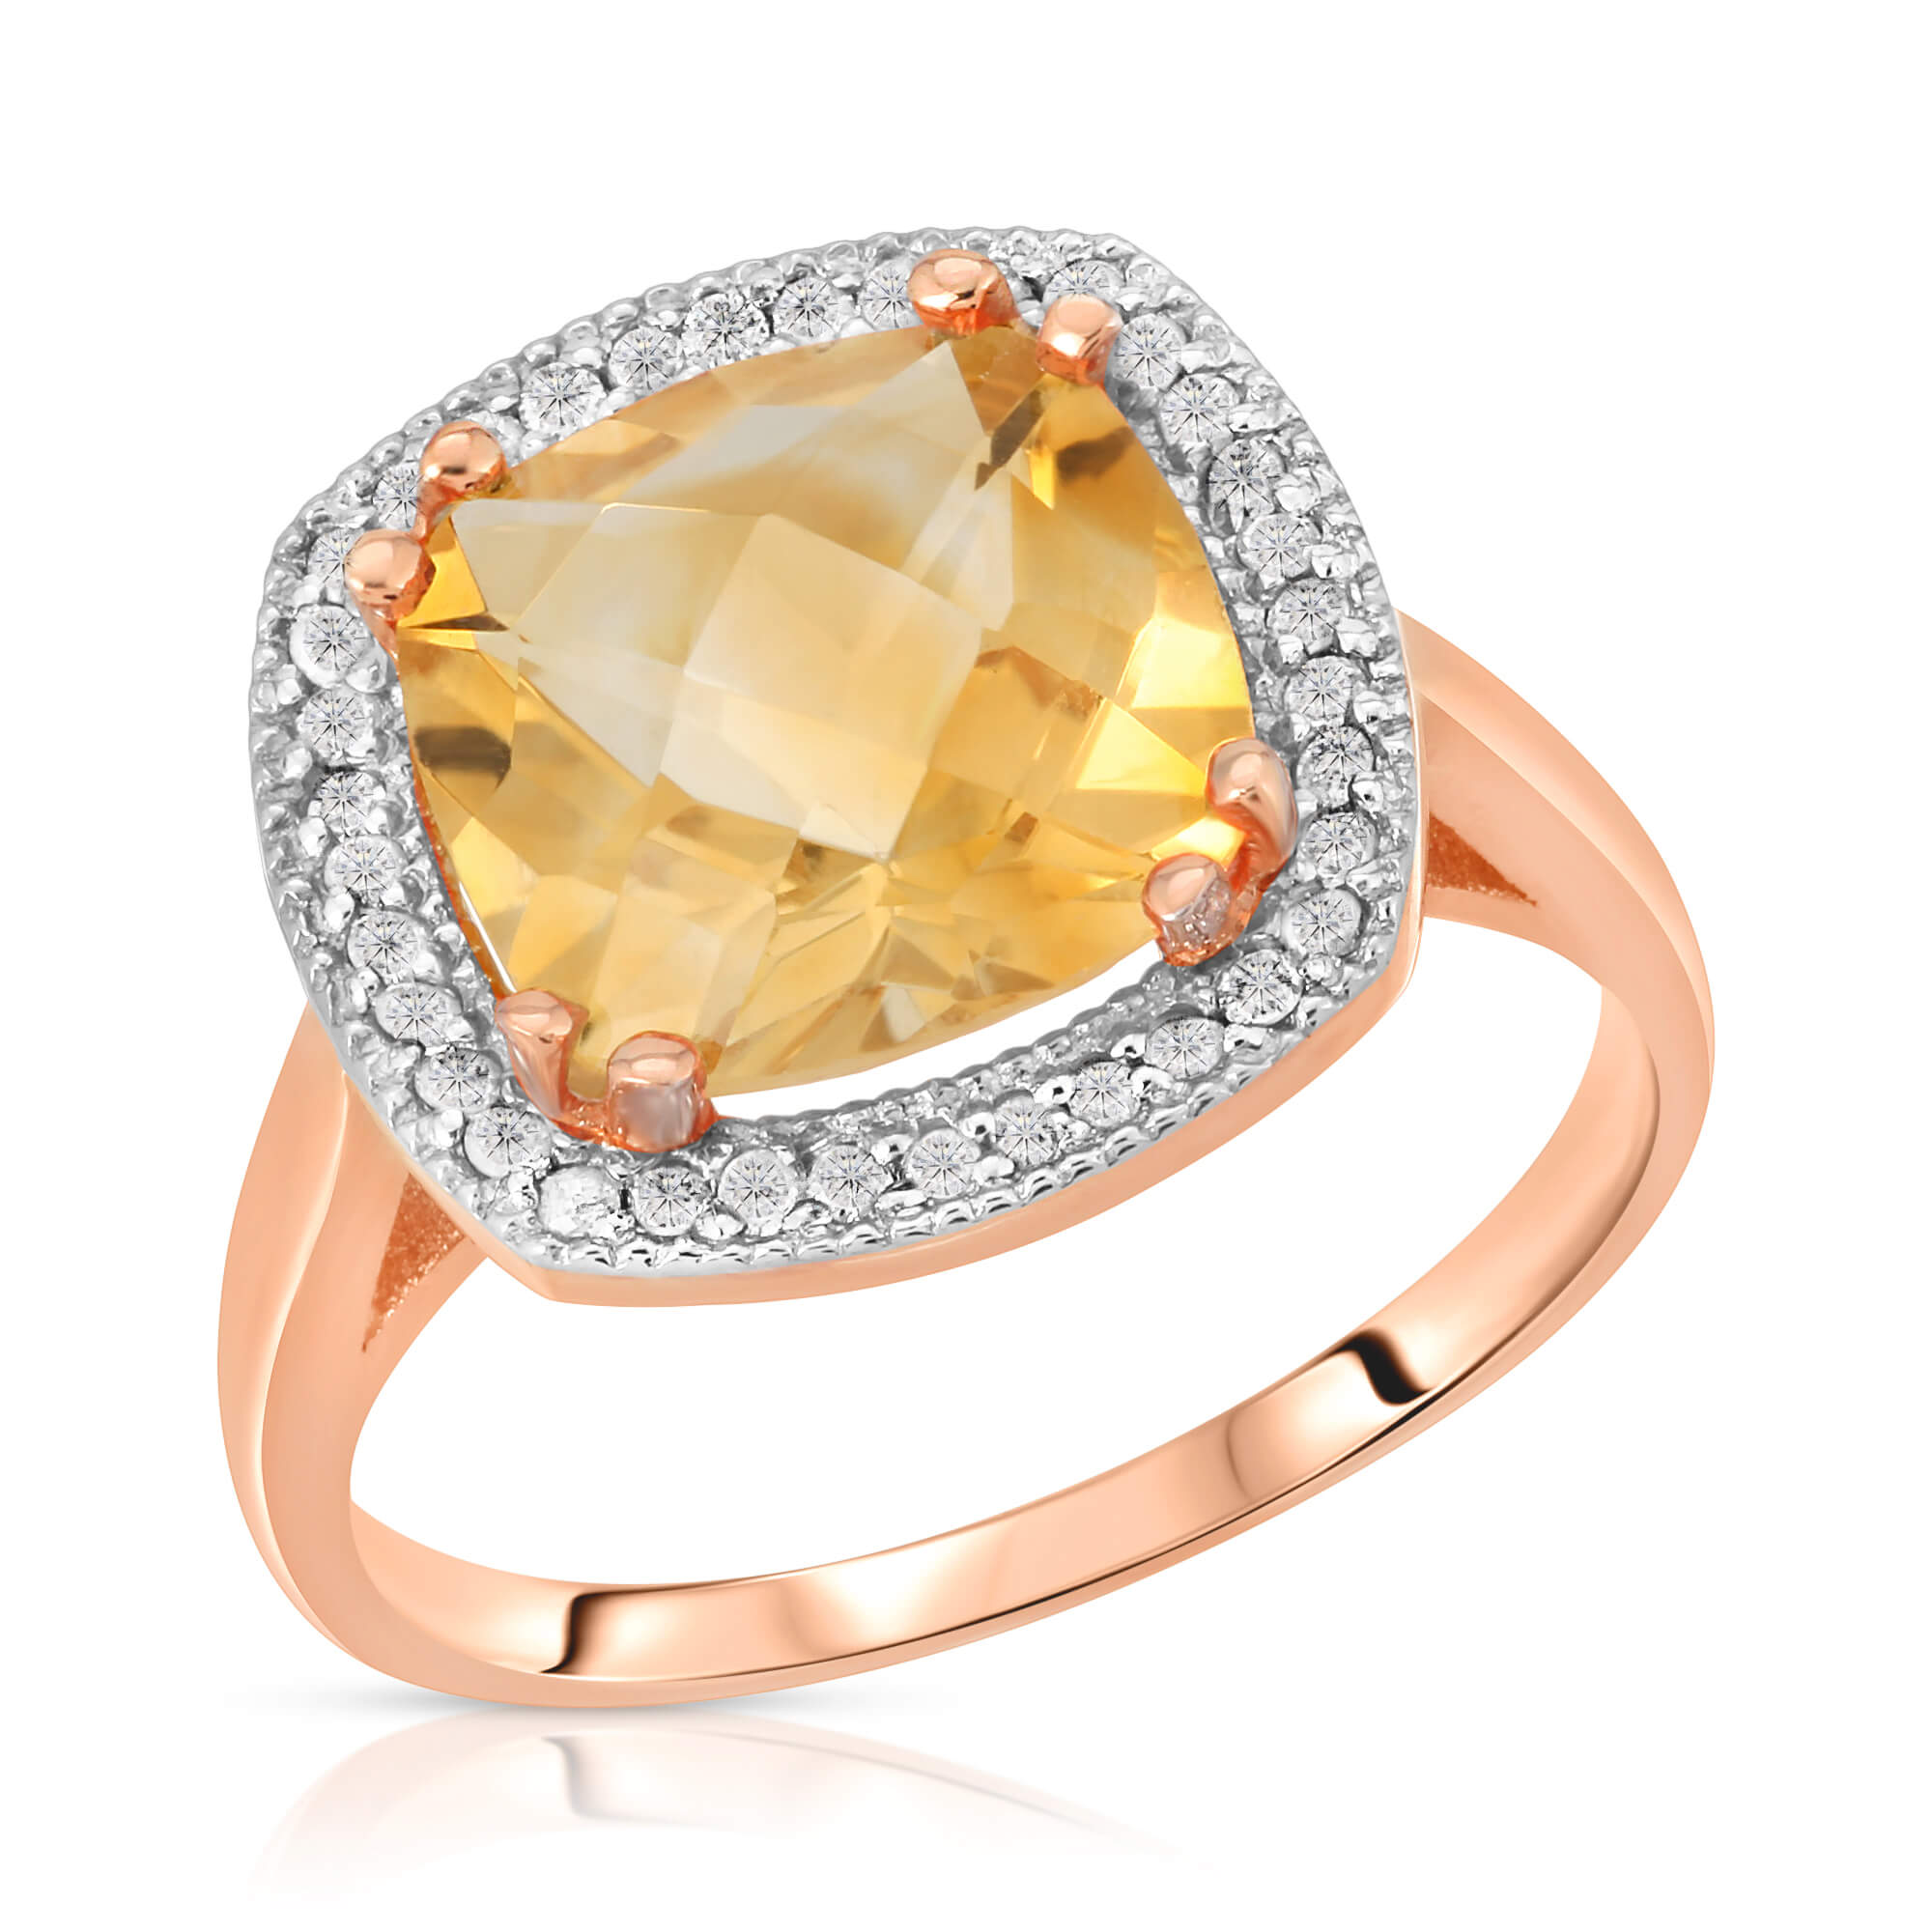 Cushion Cut Citrine Ring 3.8 ctw in 18ct Rose Gold